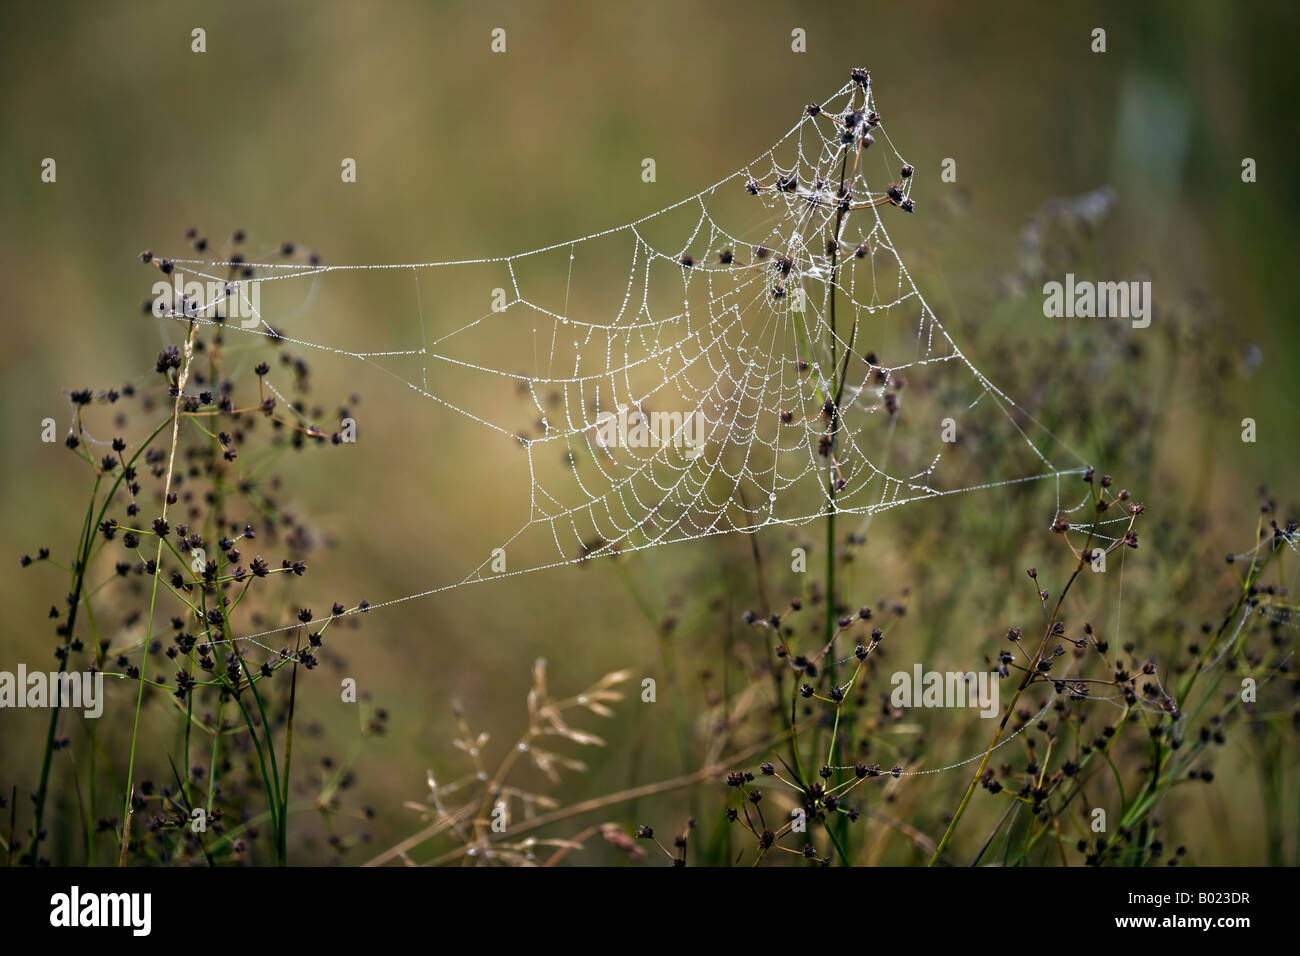 Autumn spider's web covered with dew. Stock Photo